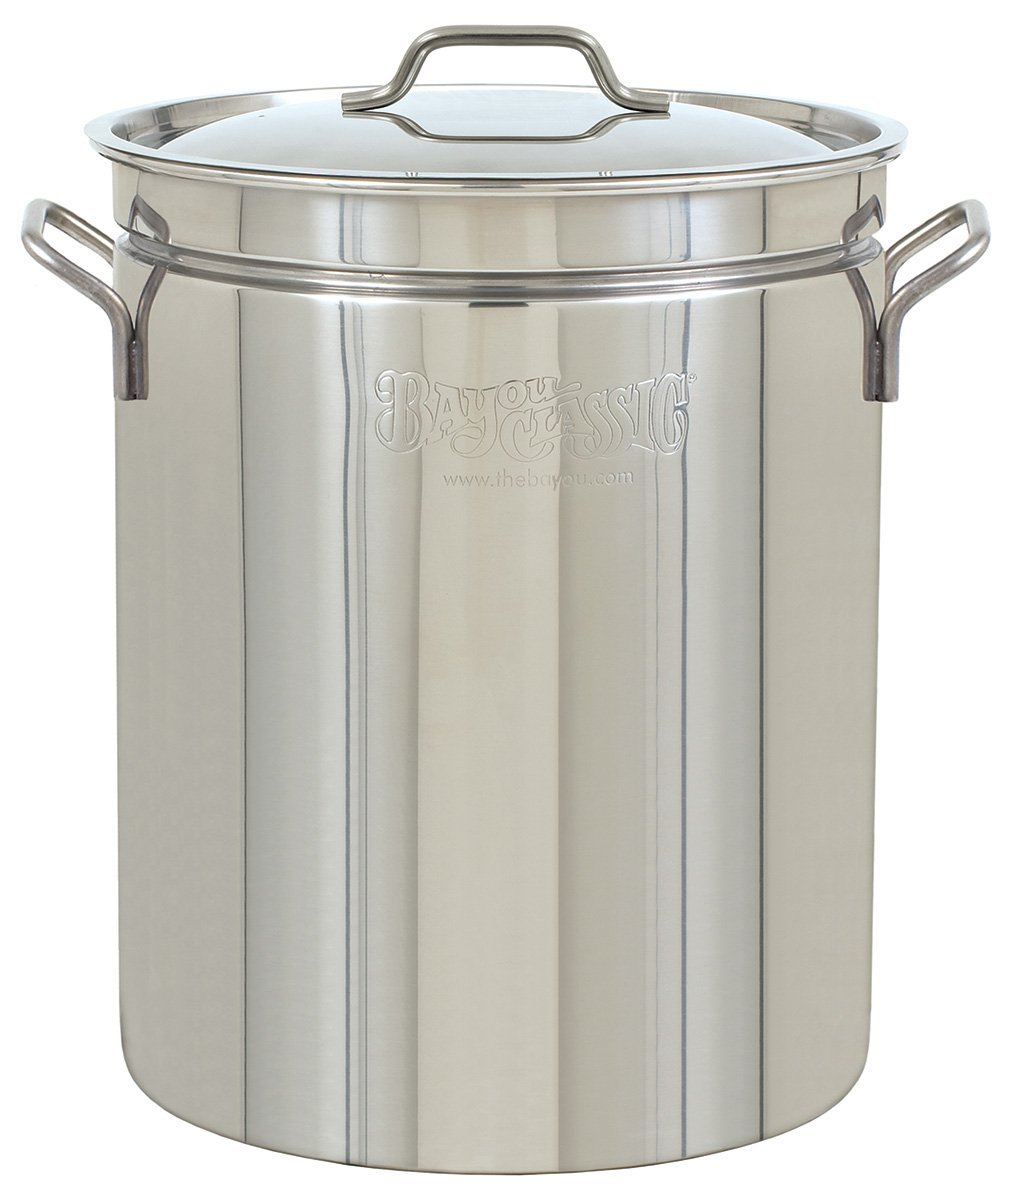 Bayou Classic 1044 Stainless-Steel Stockpot (44 Quart / 11 Gallons)